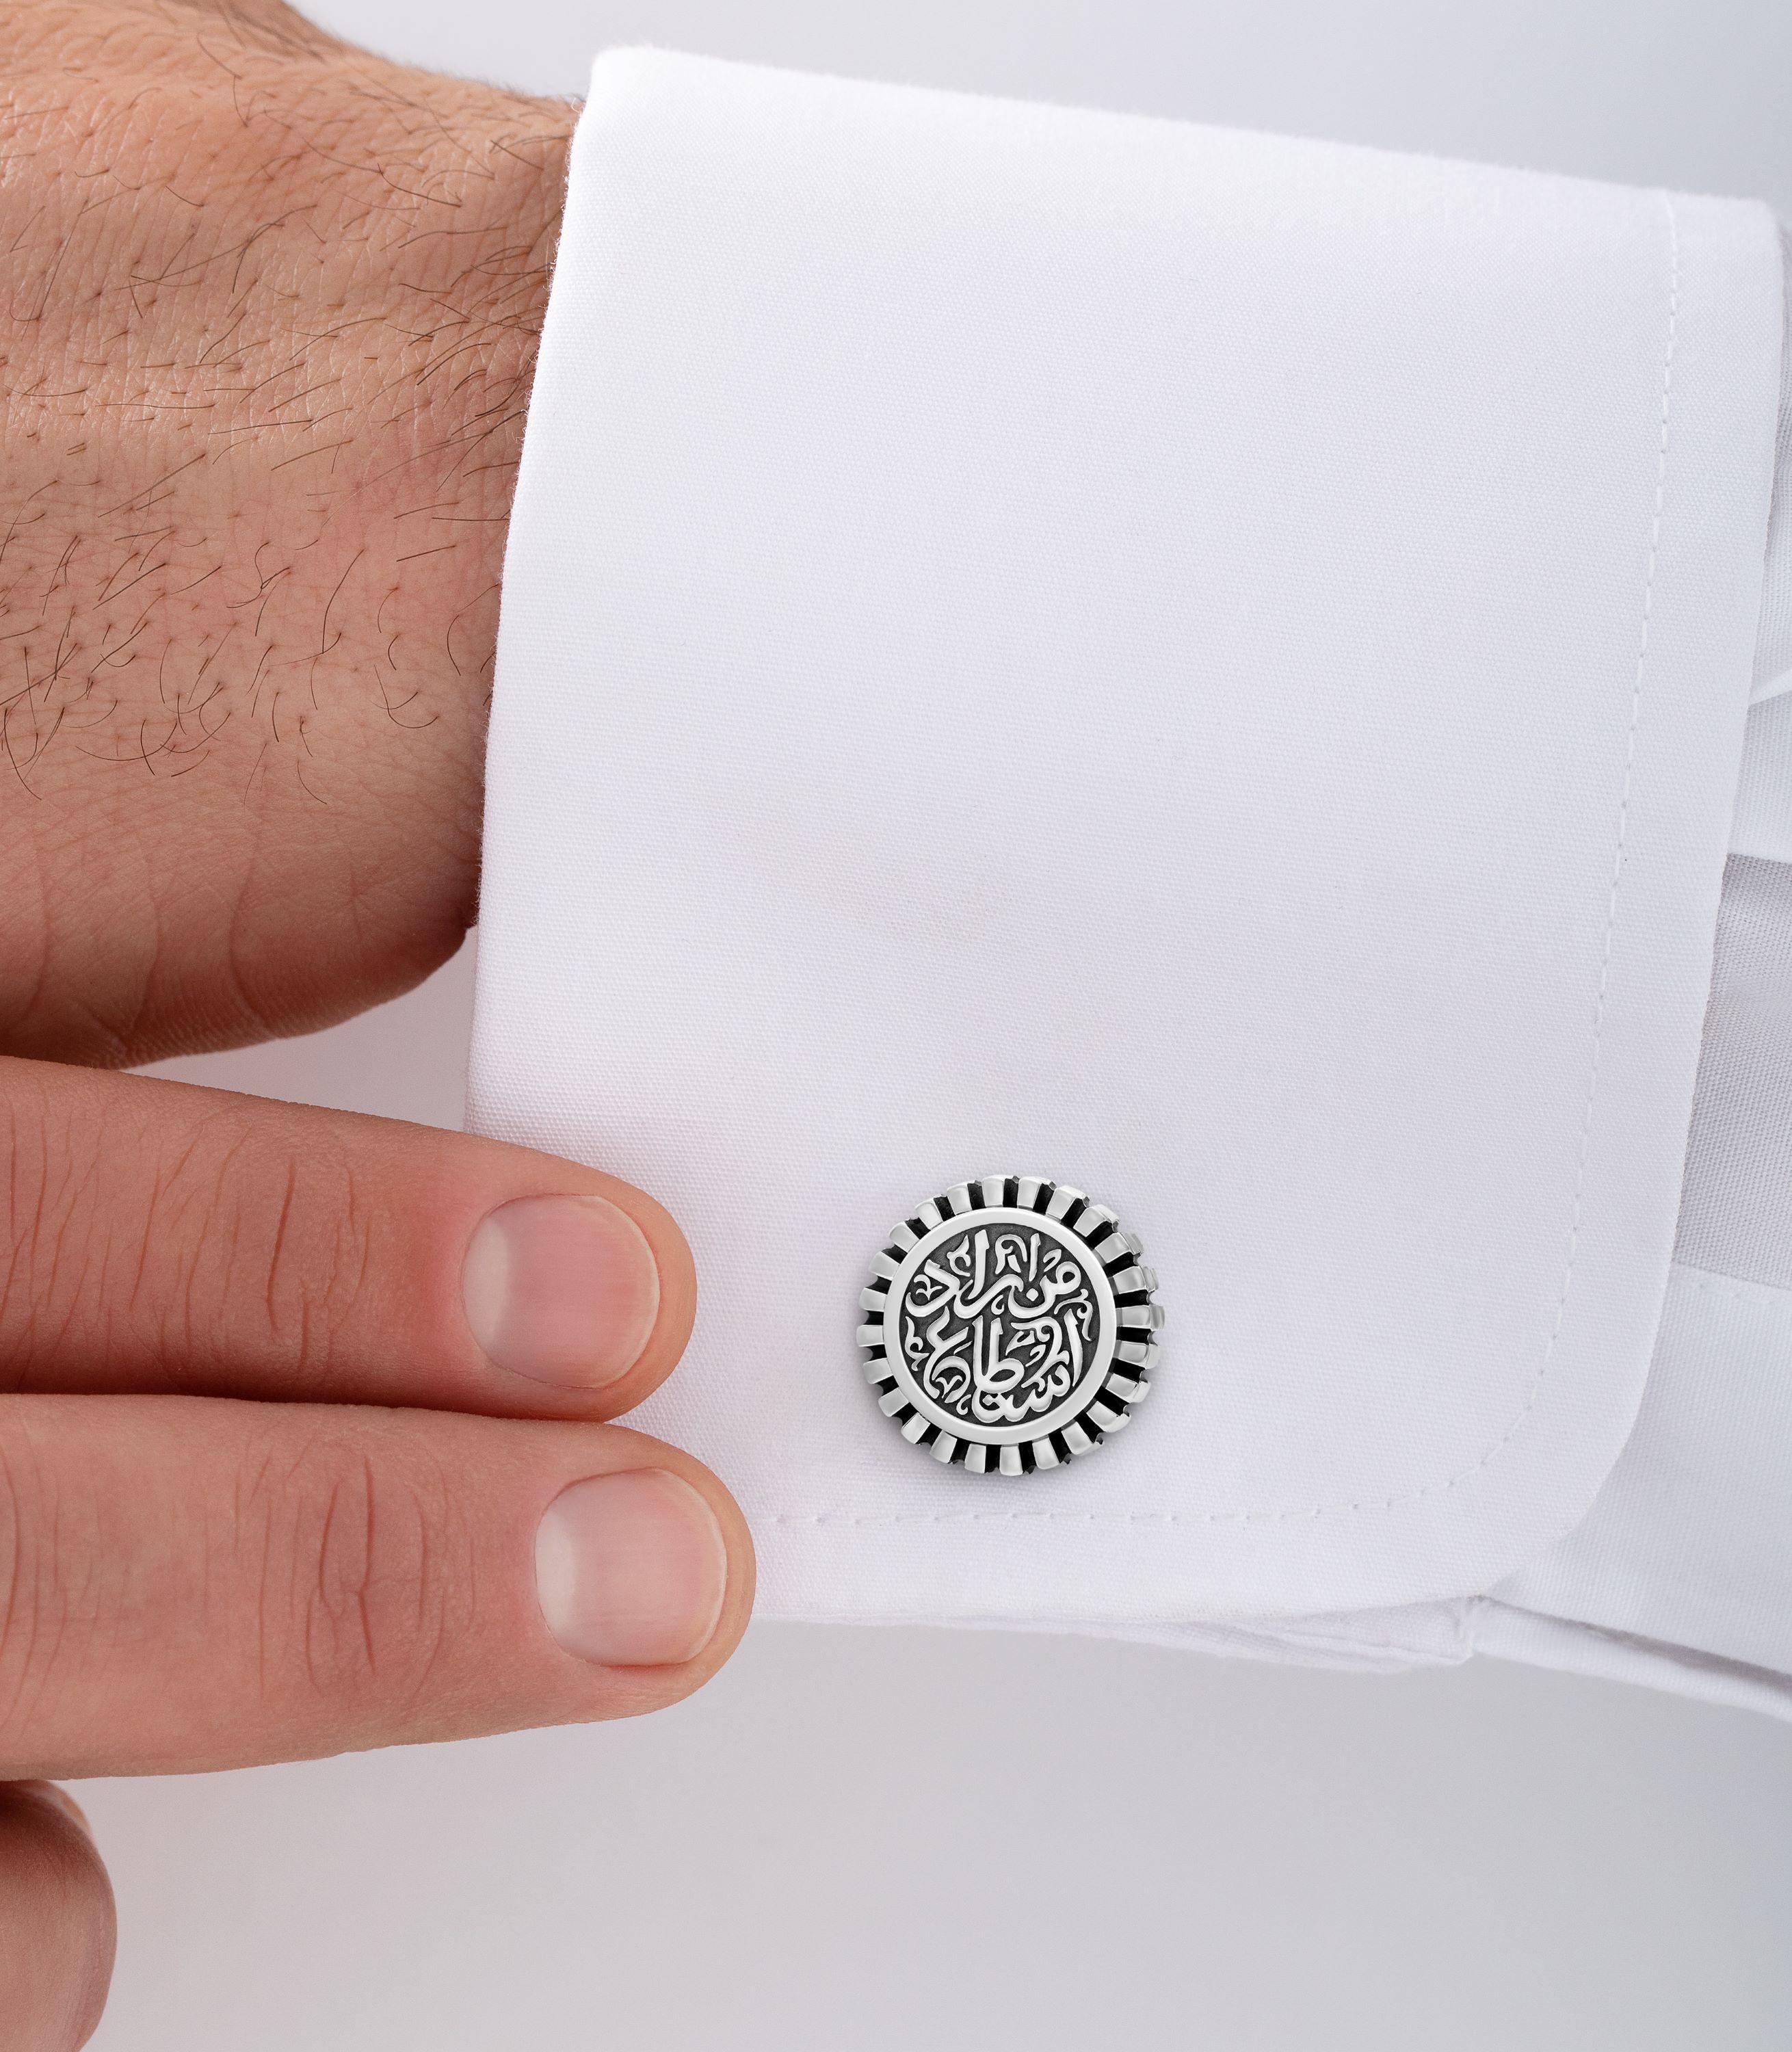 Classic Sterling Silver Cufflinks inscribed with calligraphy. 

Fusing the modern and traditional, the Sterling Silver Power Cufflinks are inscribed with calligraphy that
affirms, ‘من اراد استطاع’ – 